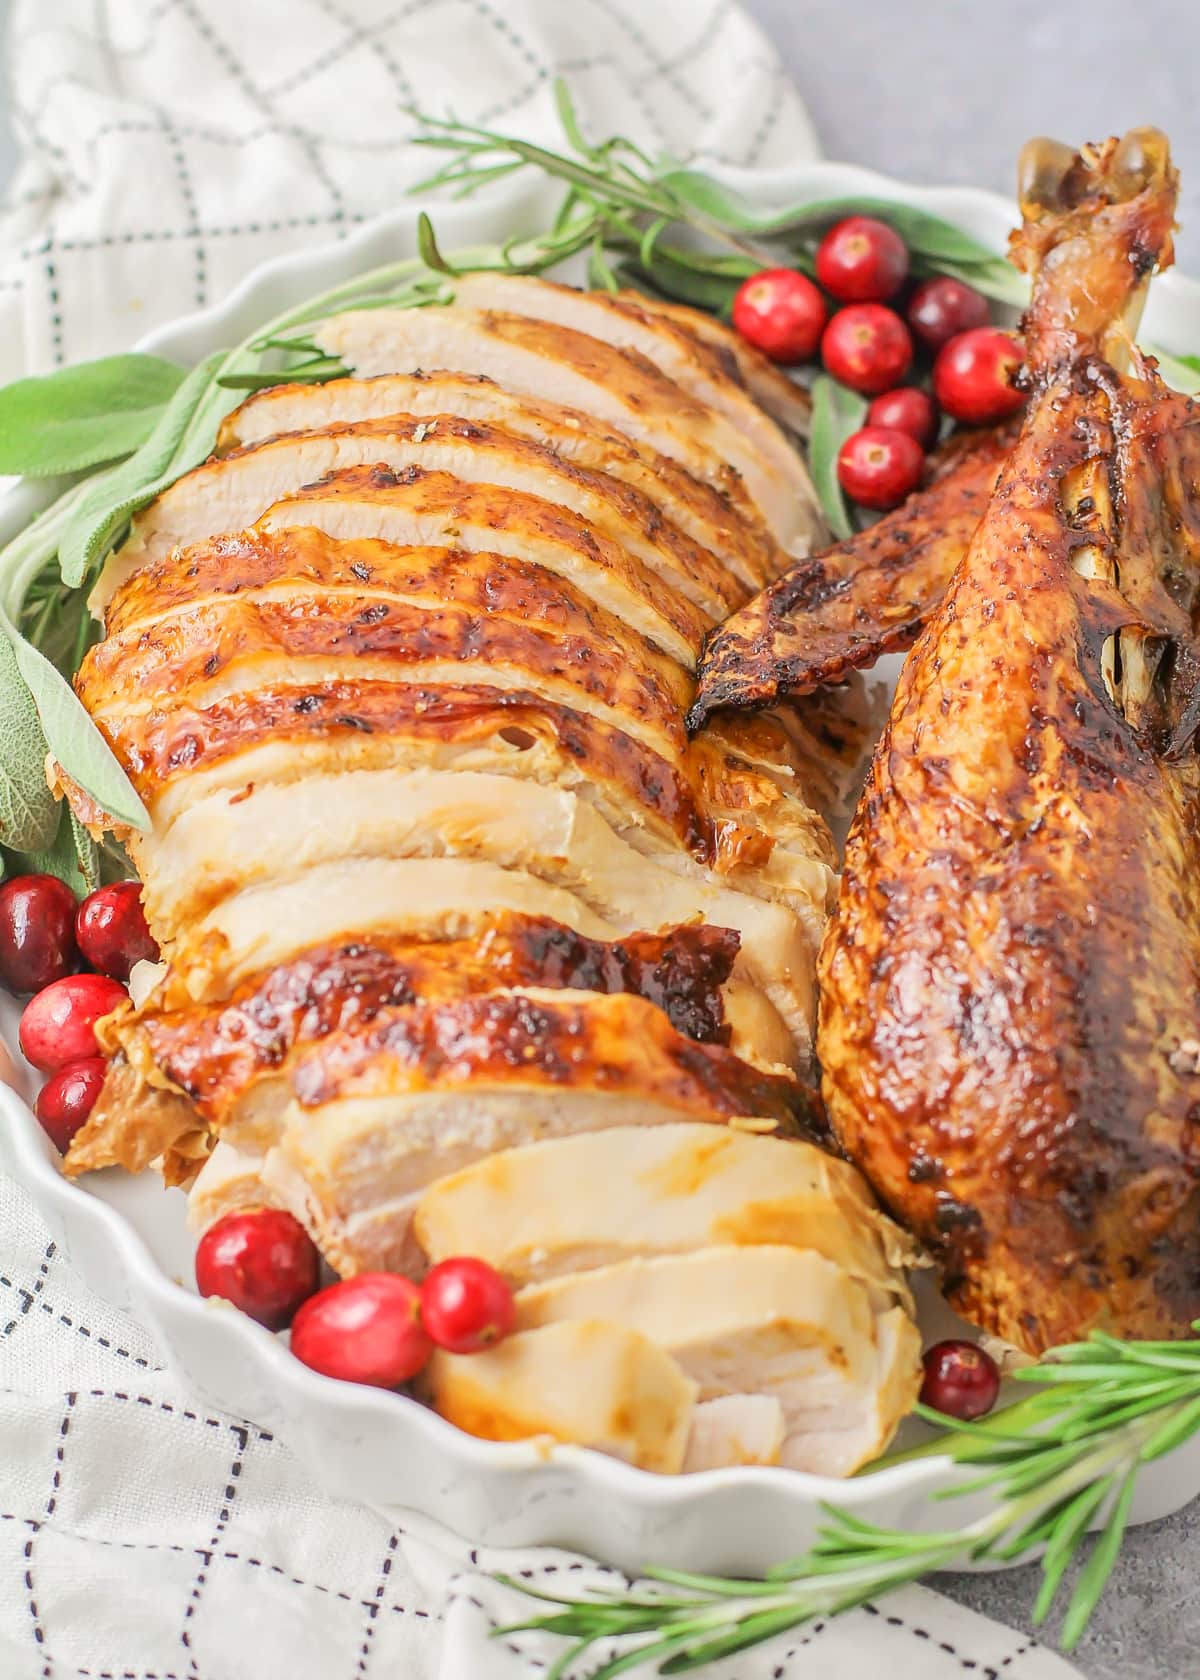 Roast turkey close up image - sliced on baking dish with fresh herbs and cranberries.